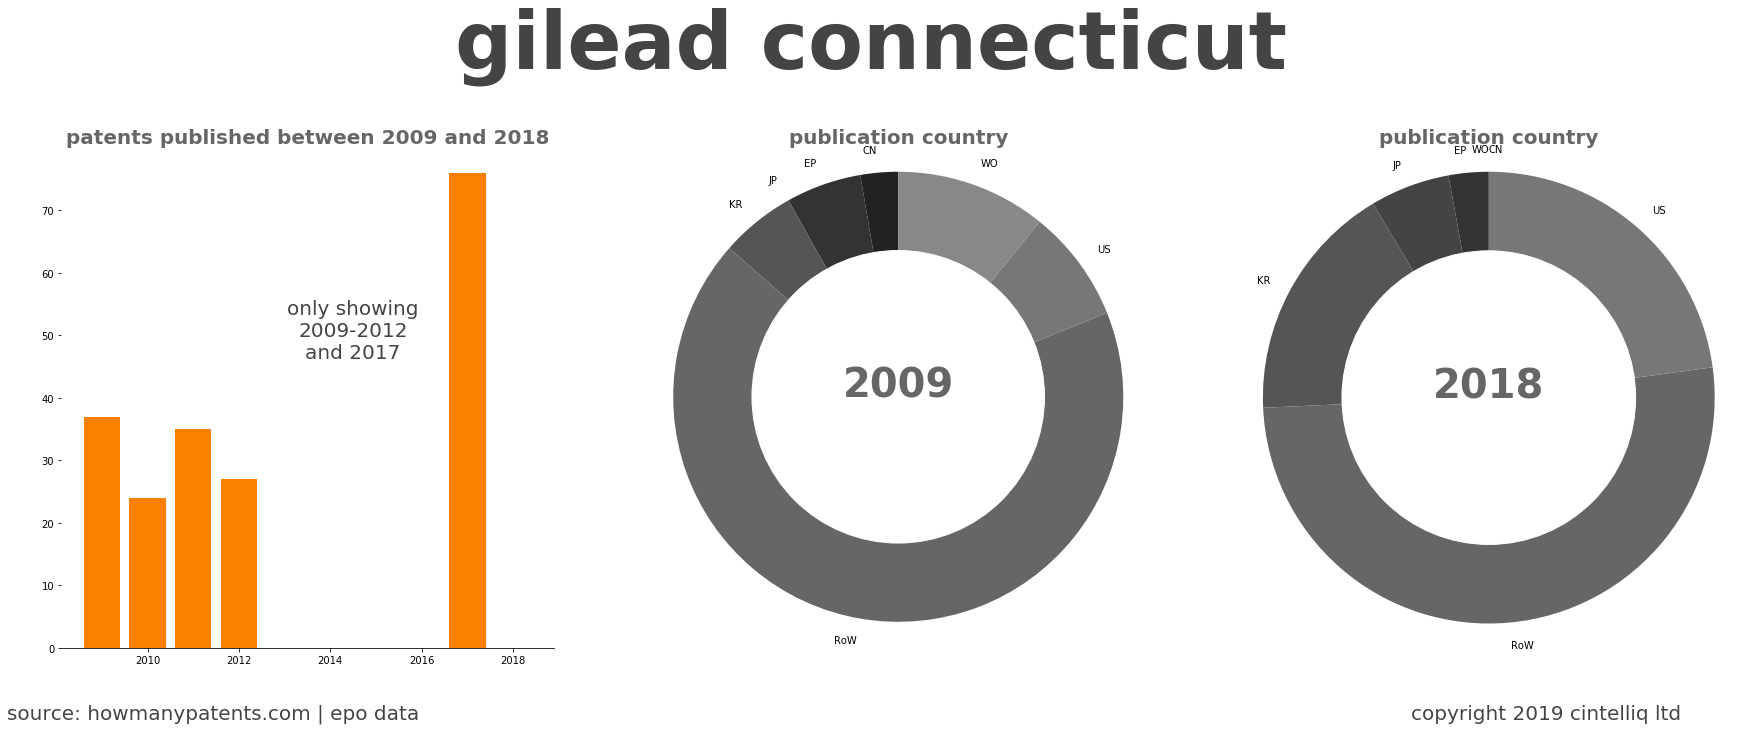 summary of patents for Gilead Connecticut